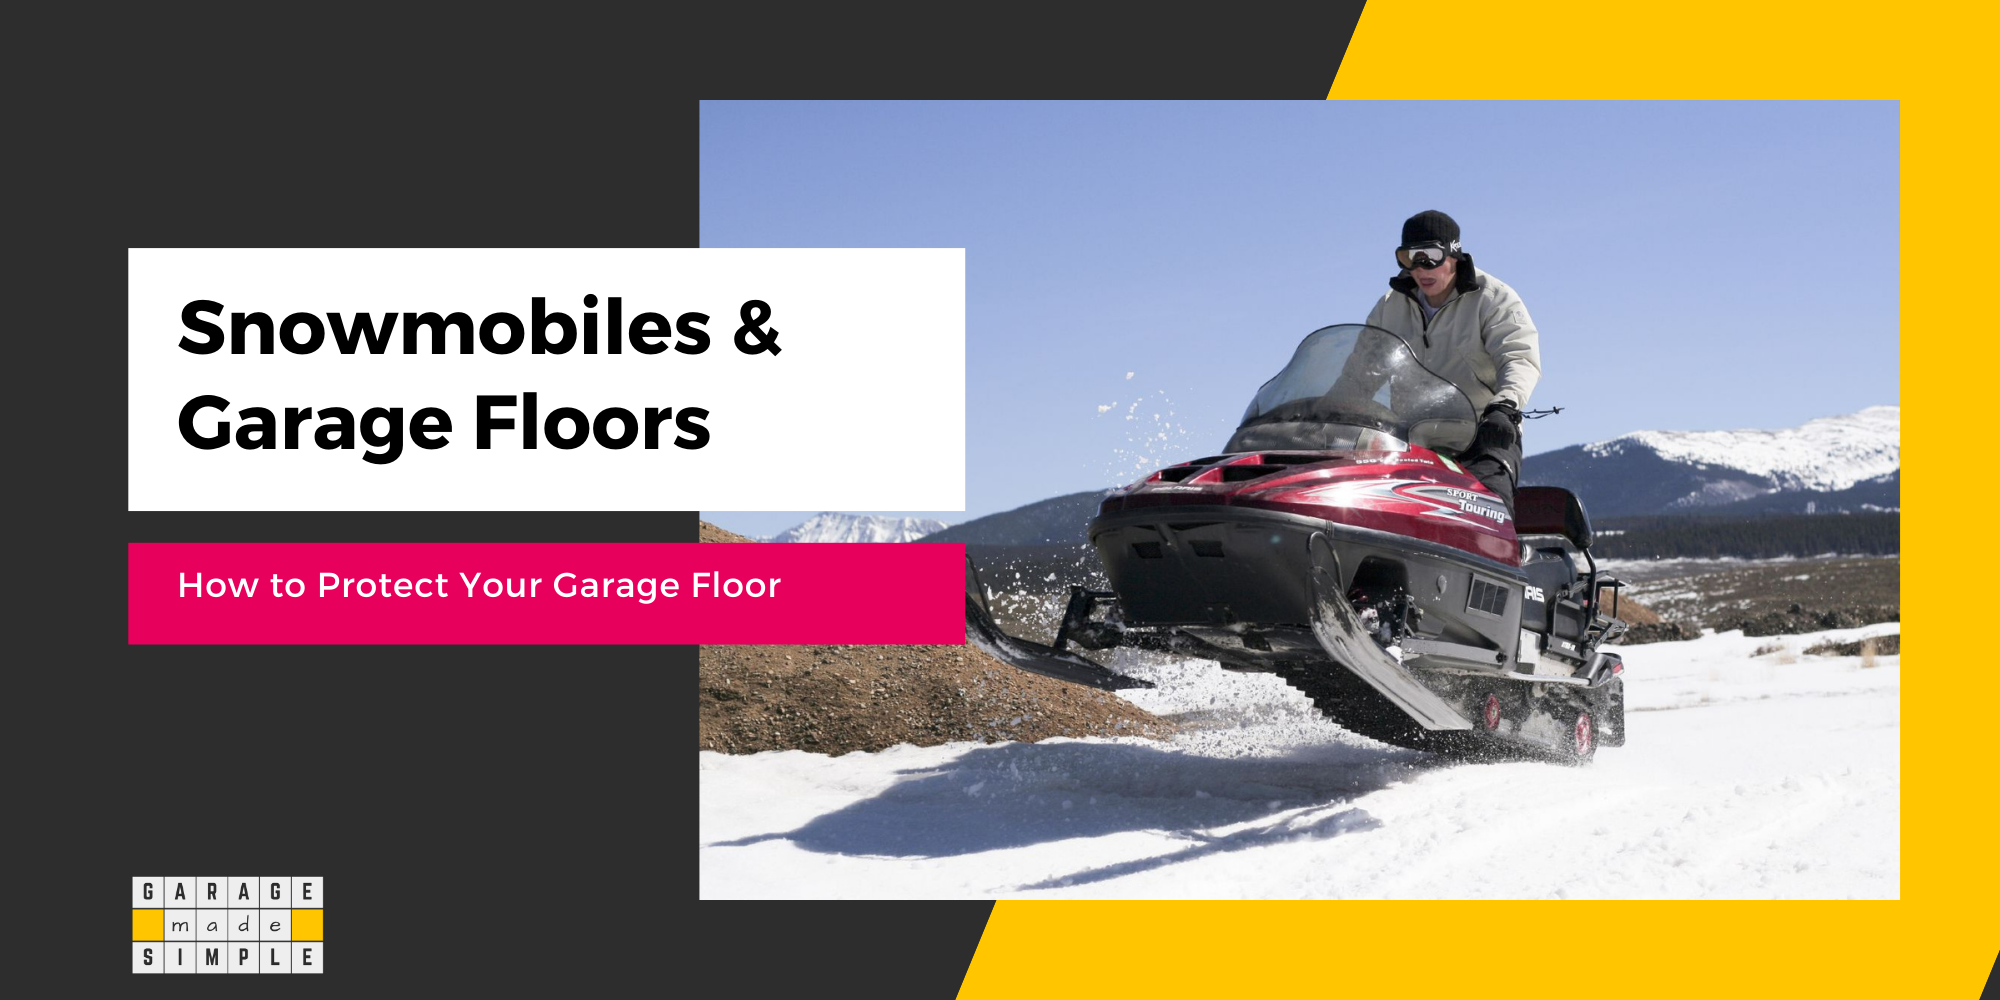 The Best Ways To Protect Garage Floors from Snowmobiles